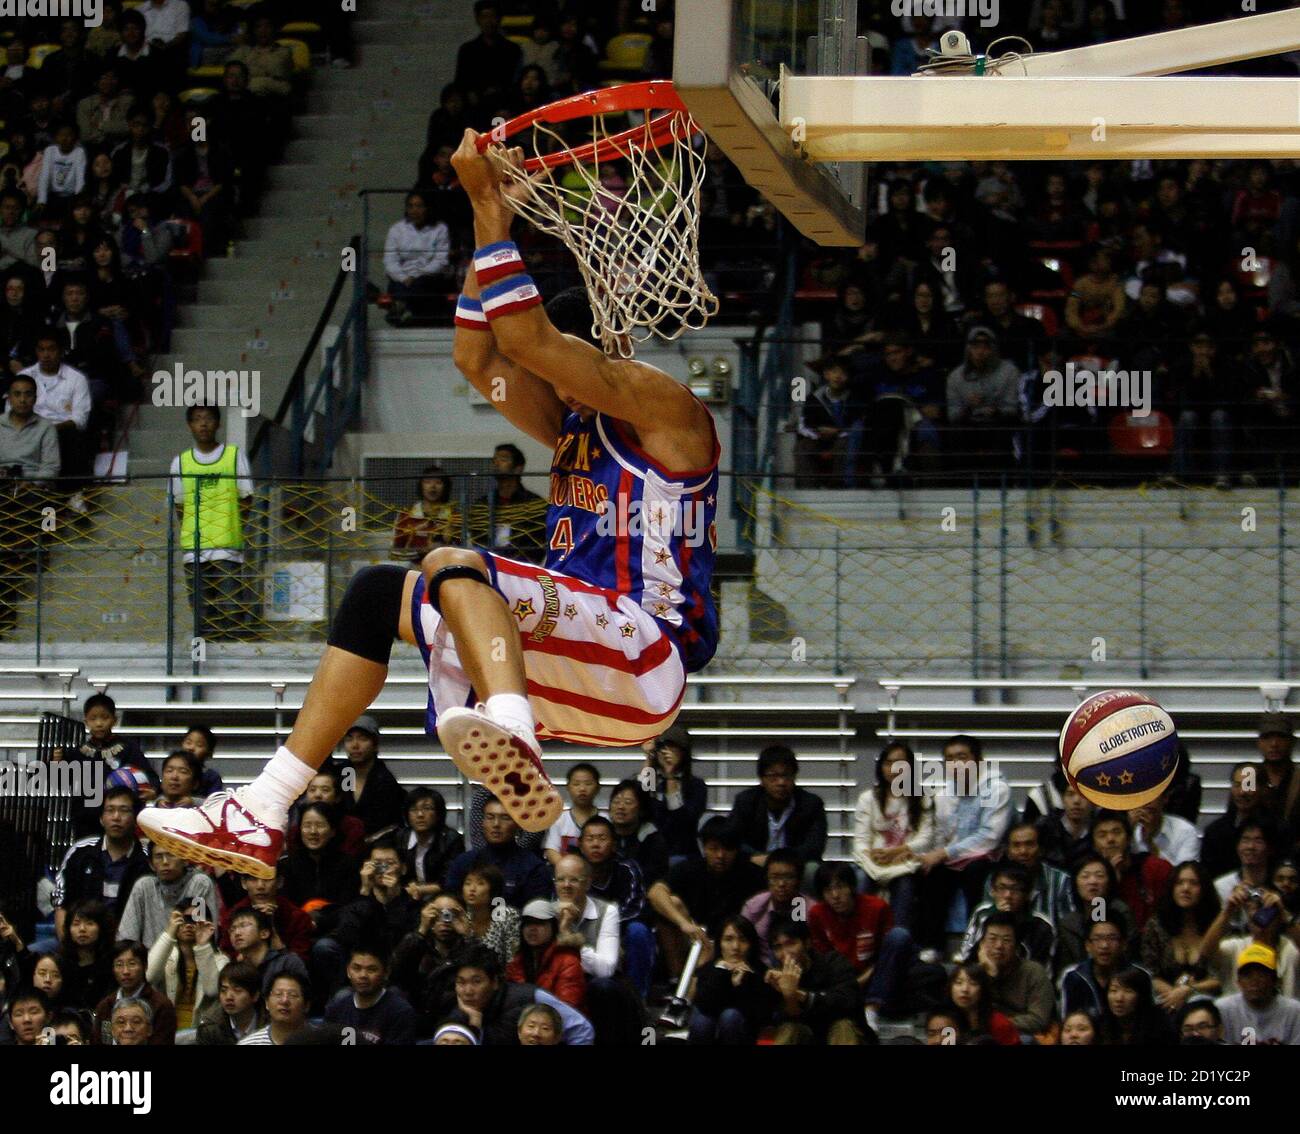 El Gato Melendez of the Harlem Globetrotters slam dunks the ball during a  performance basketball match against the Washington Generals in Taipei  December 2, 2009. REUTERS/Nicky Loh (TAIWAN SPORT BASKETBALL Fotografía de